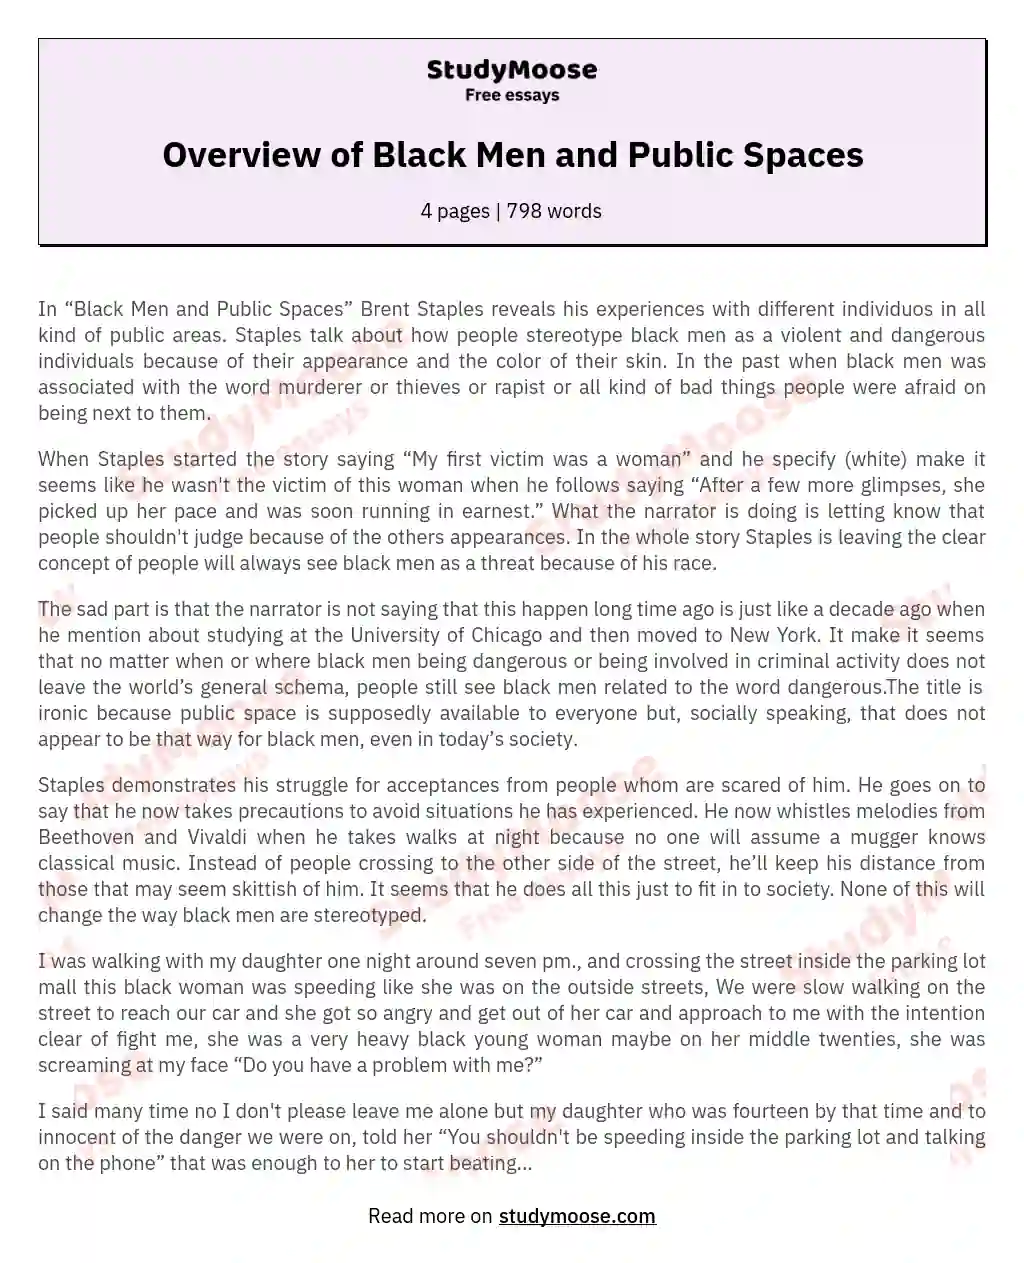 Exploring Racial Stereotypes and Prejudices in "Black Men and Public Spaces" essay